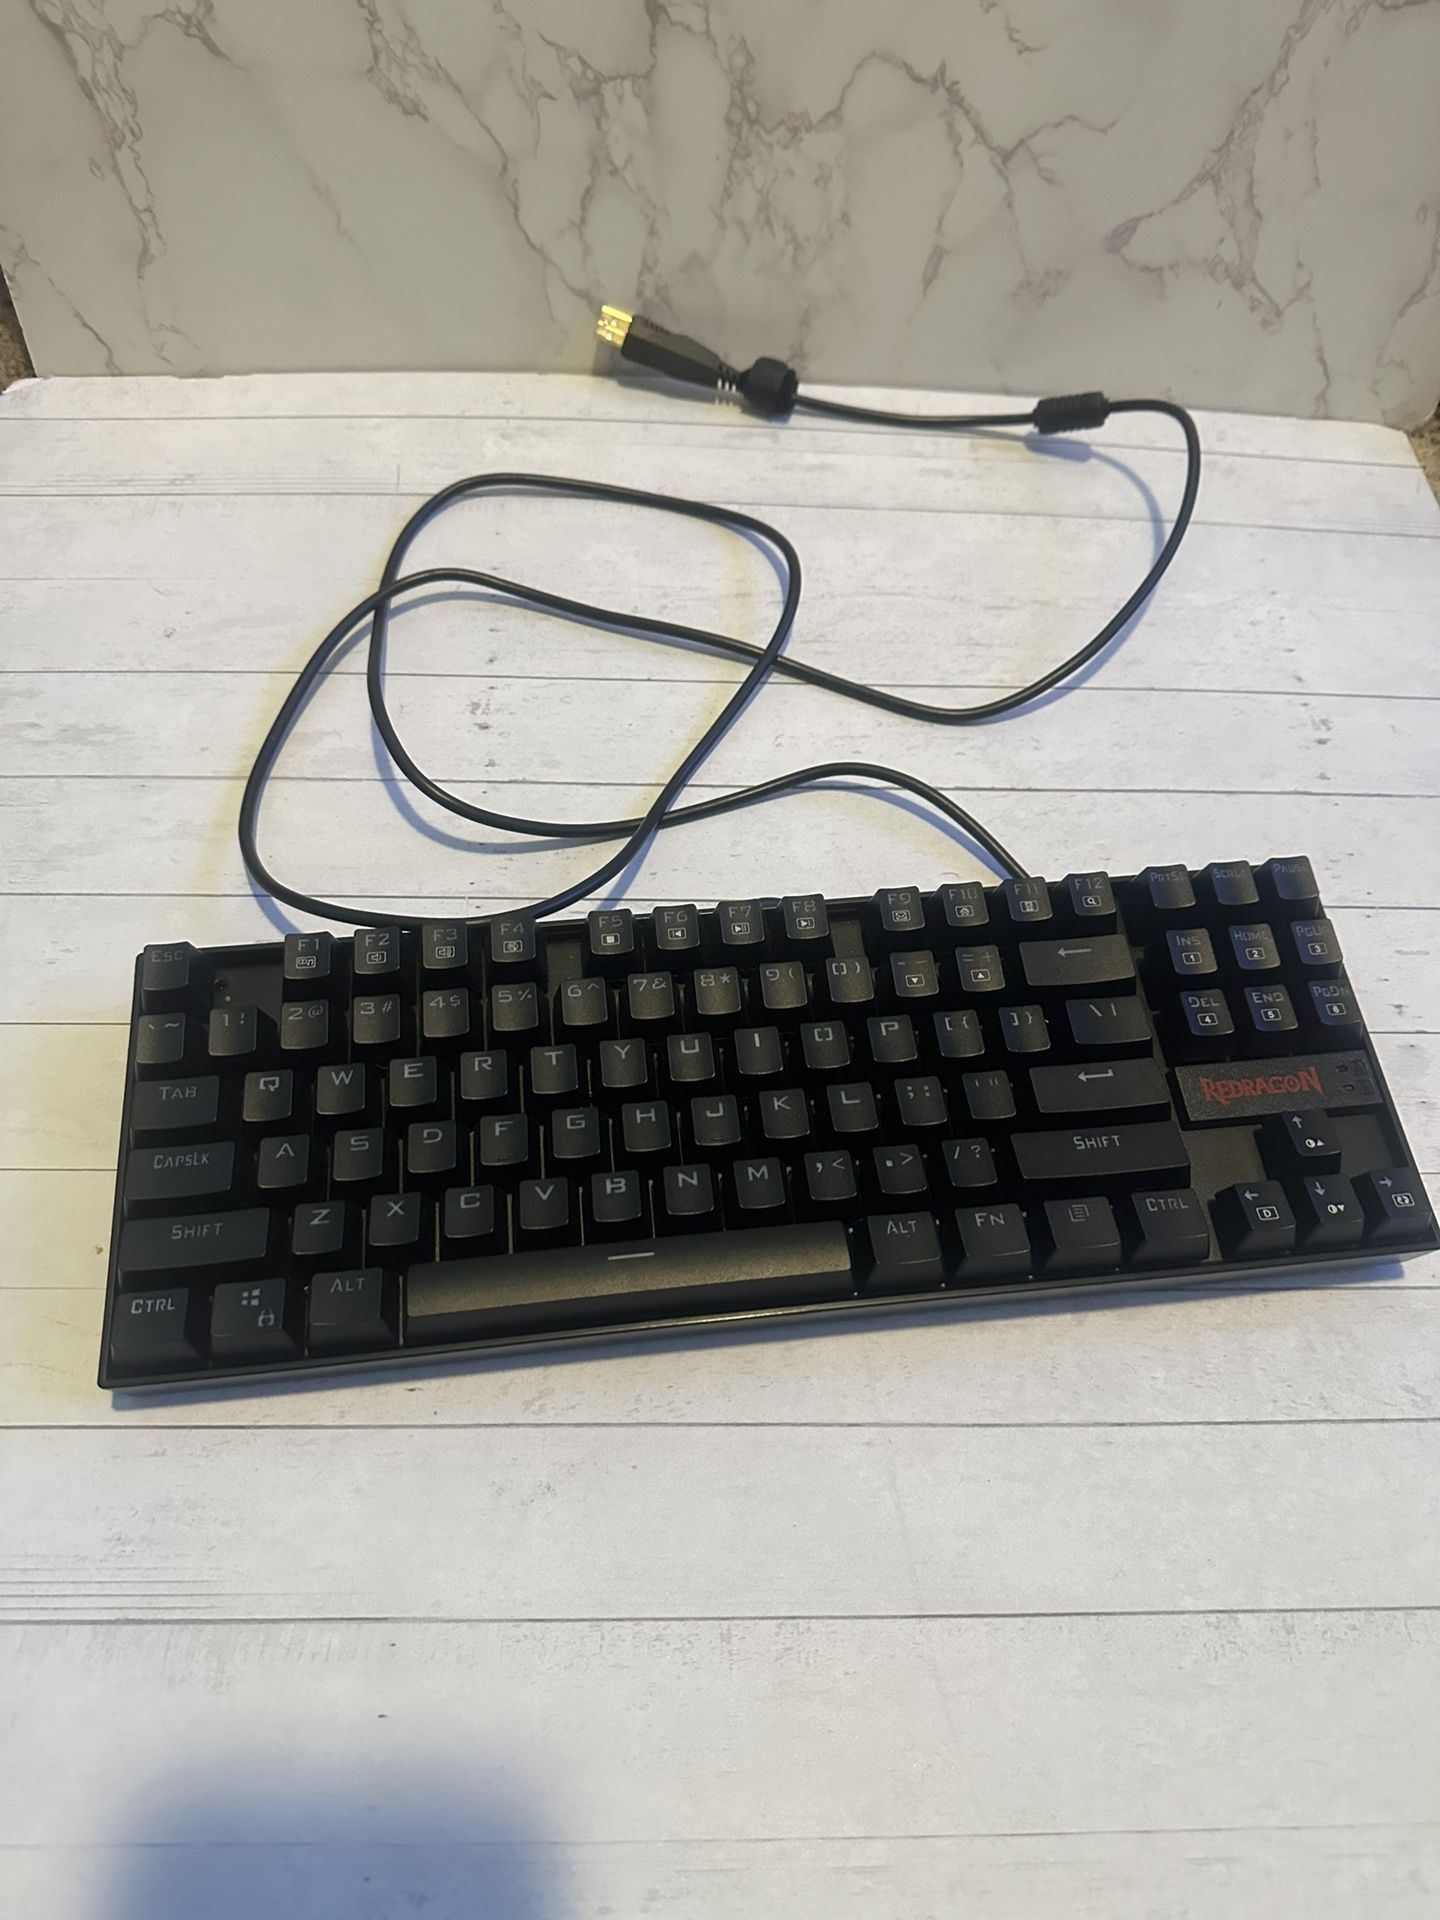 Redragon keyboard for parts